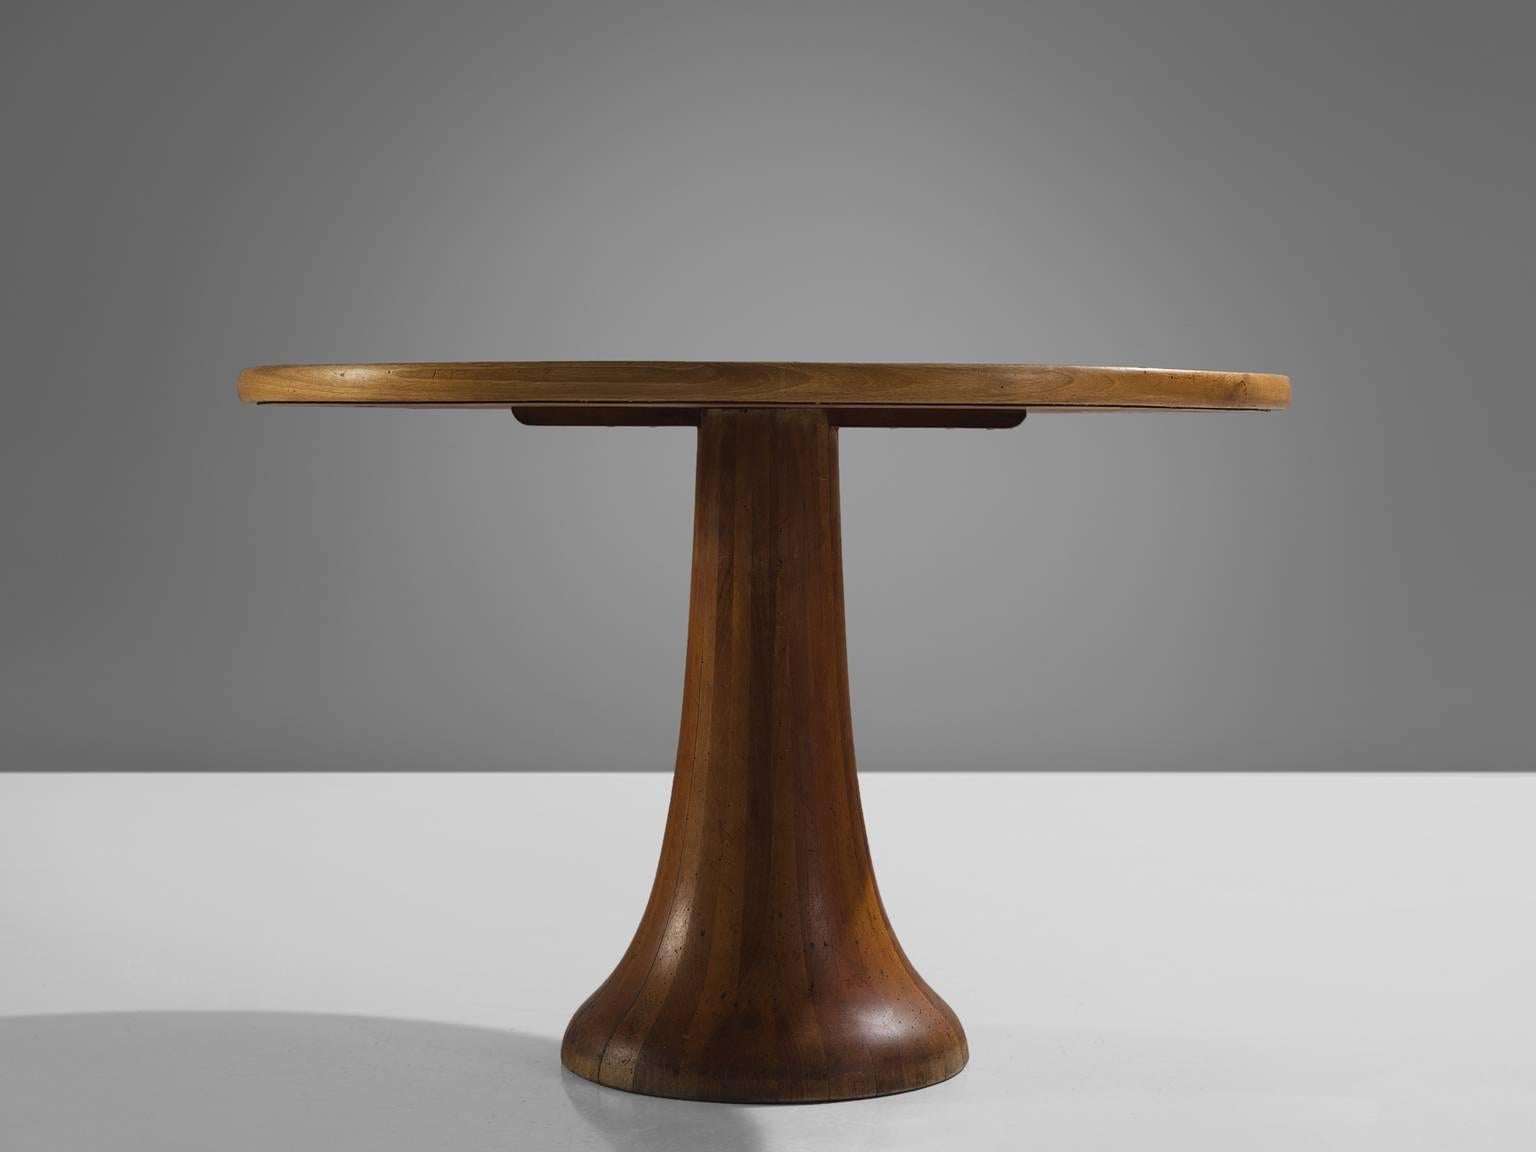 Centre table, oak, Italy, 1970s.

This strong, graphic circular dining table features a colon foot and a thick circular inlaid oak tabletop. Both the top and the foot are created by means of putting together strips of oak, creating an abstract